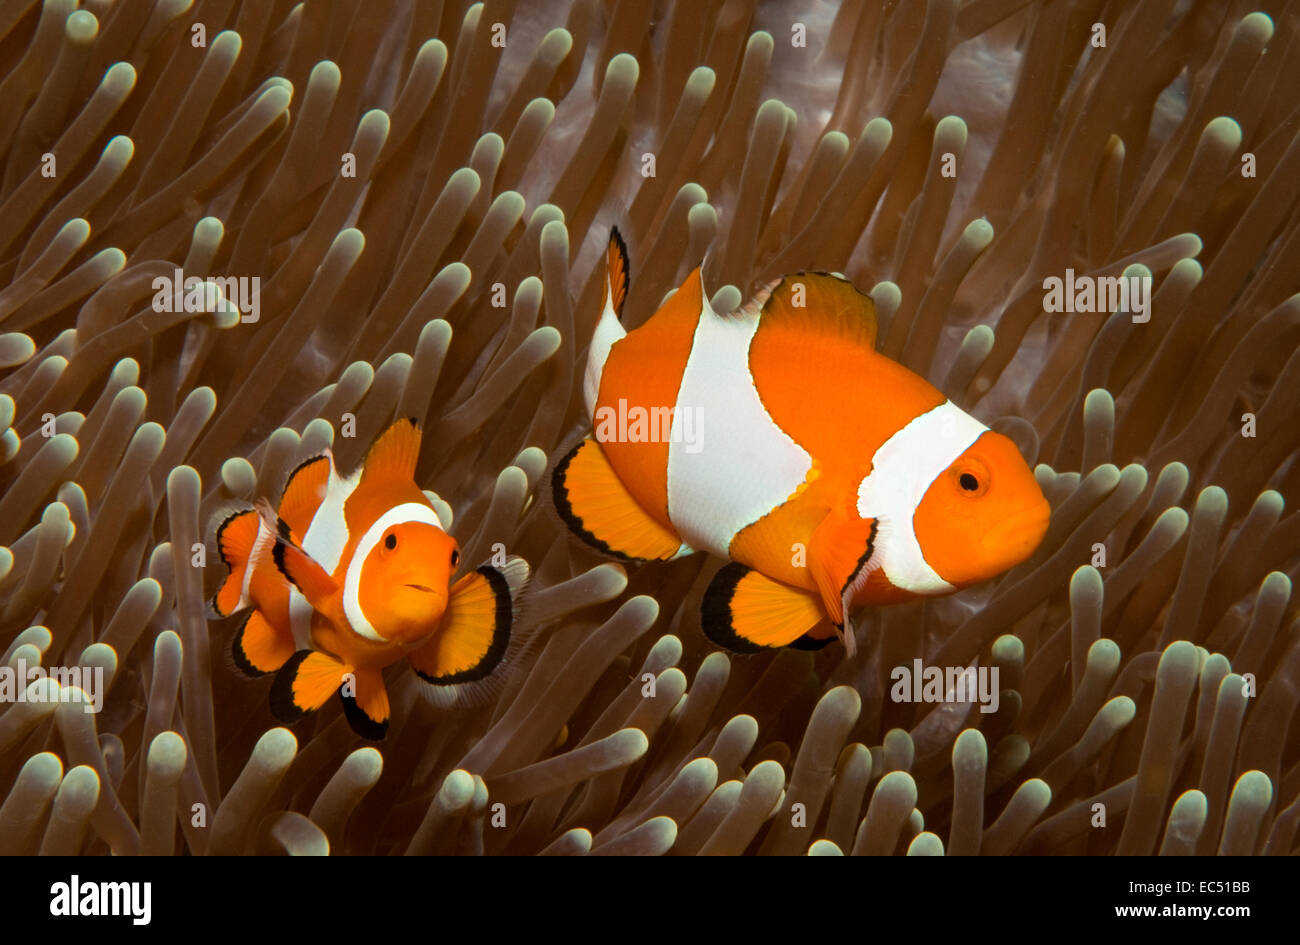 three-banded anemonefish (Amphiprion) Stock Photo